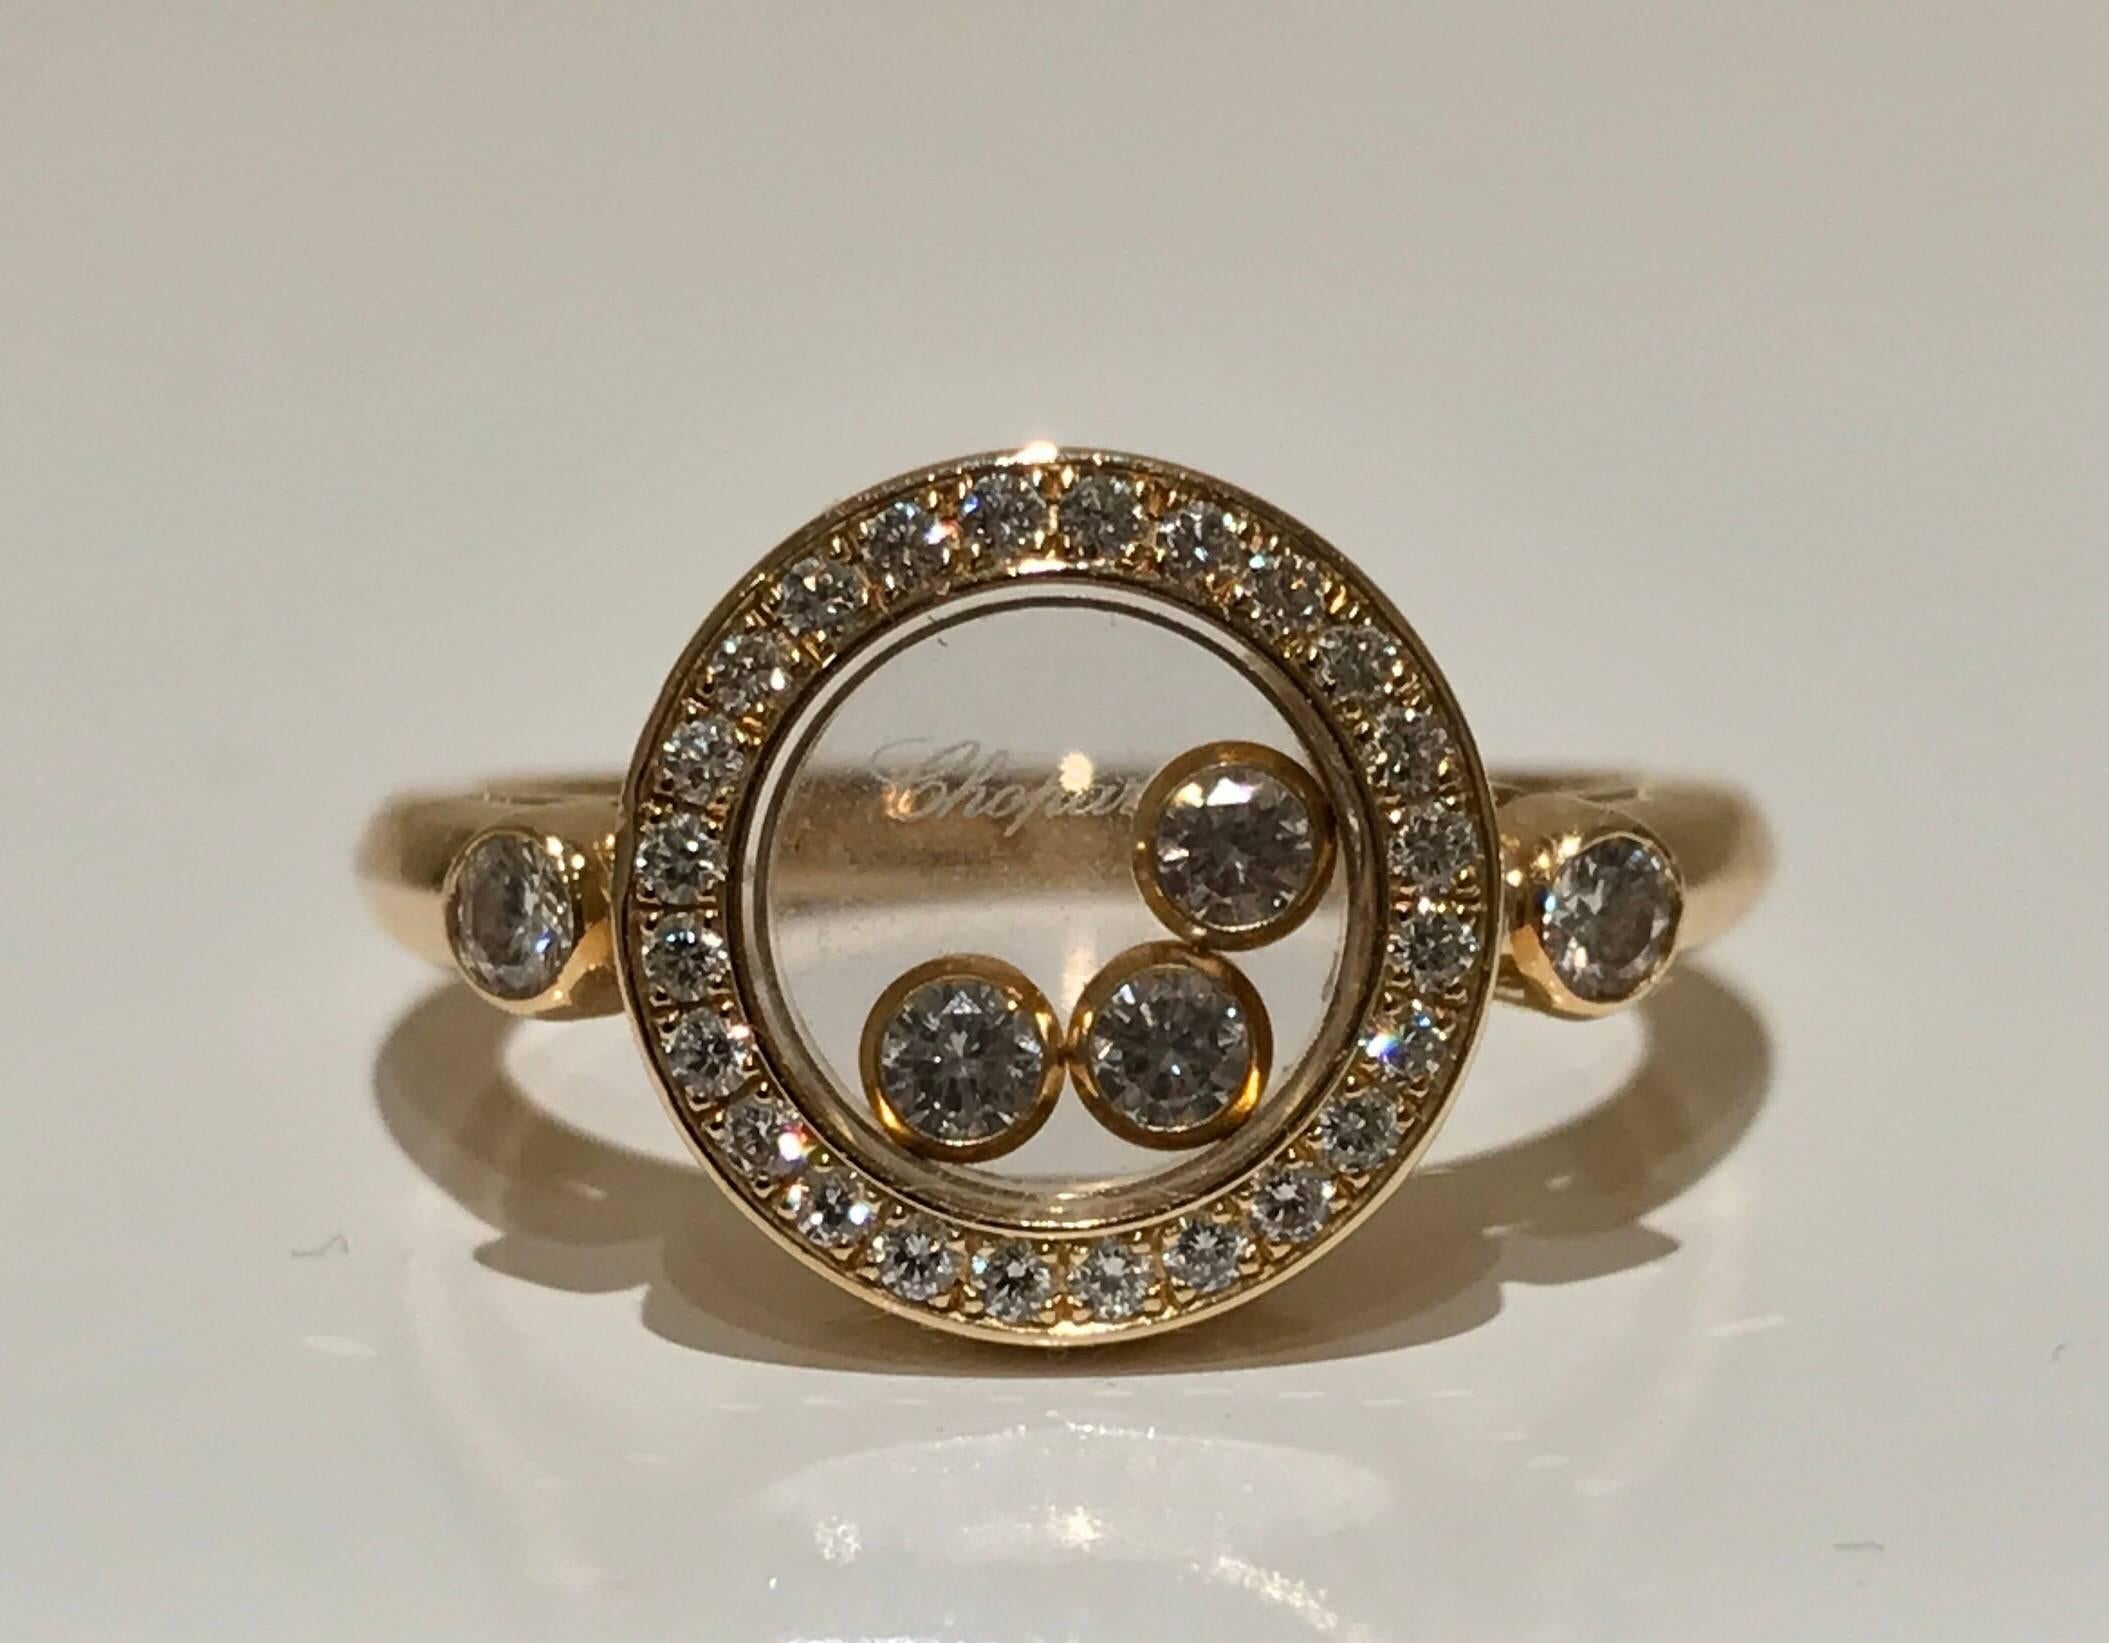 A Chopard Happy Diamonds ring set in 18k yellow gold. The ring features three free moving brilliant cut diamonds under a sapphire glass of appox 0.15 ct and has twenty three diamonds set to circle and two additional diamond set to the edges of the